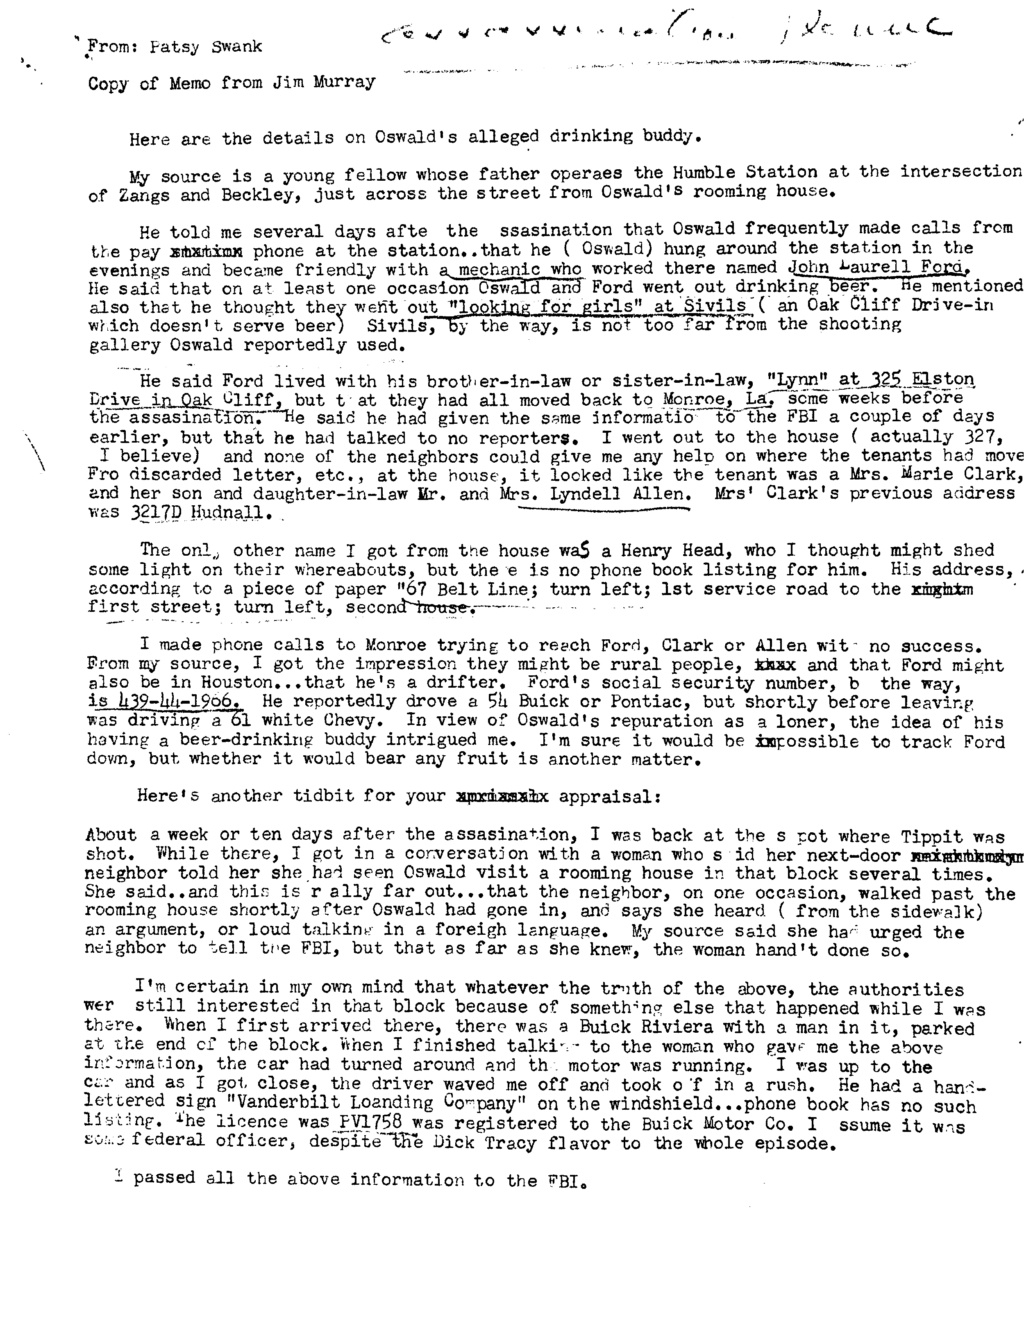 beckley - 	Did Oswald deny living at 1026 N Beckley?  - Page 8 34c68b10